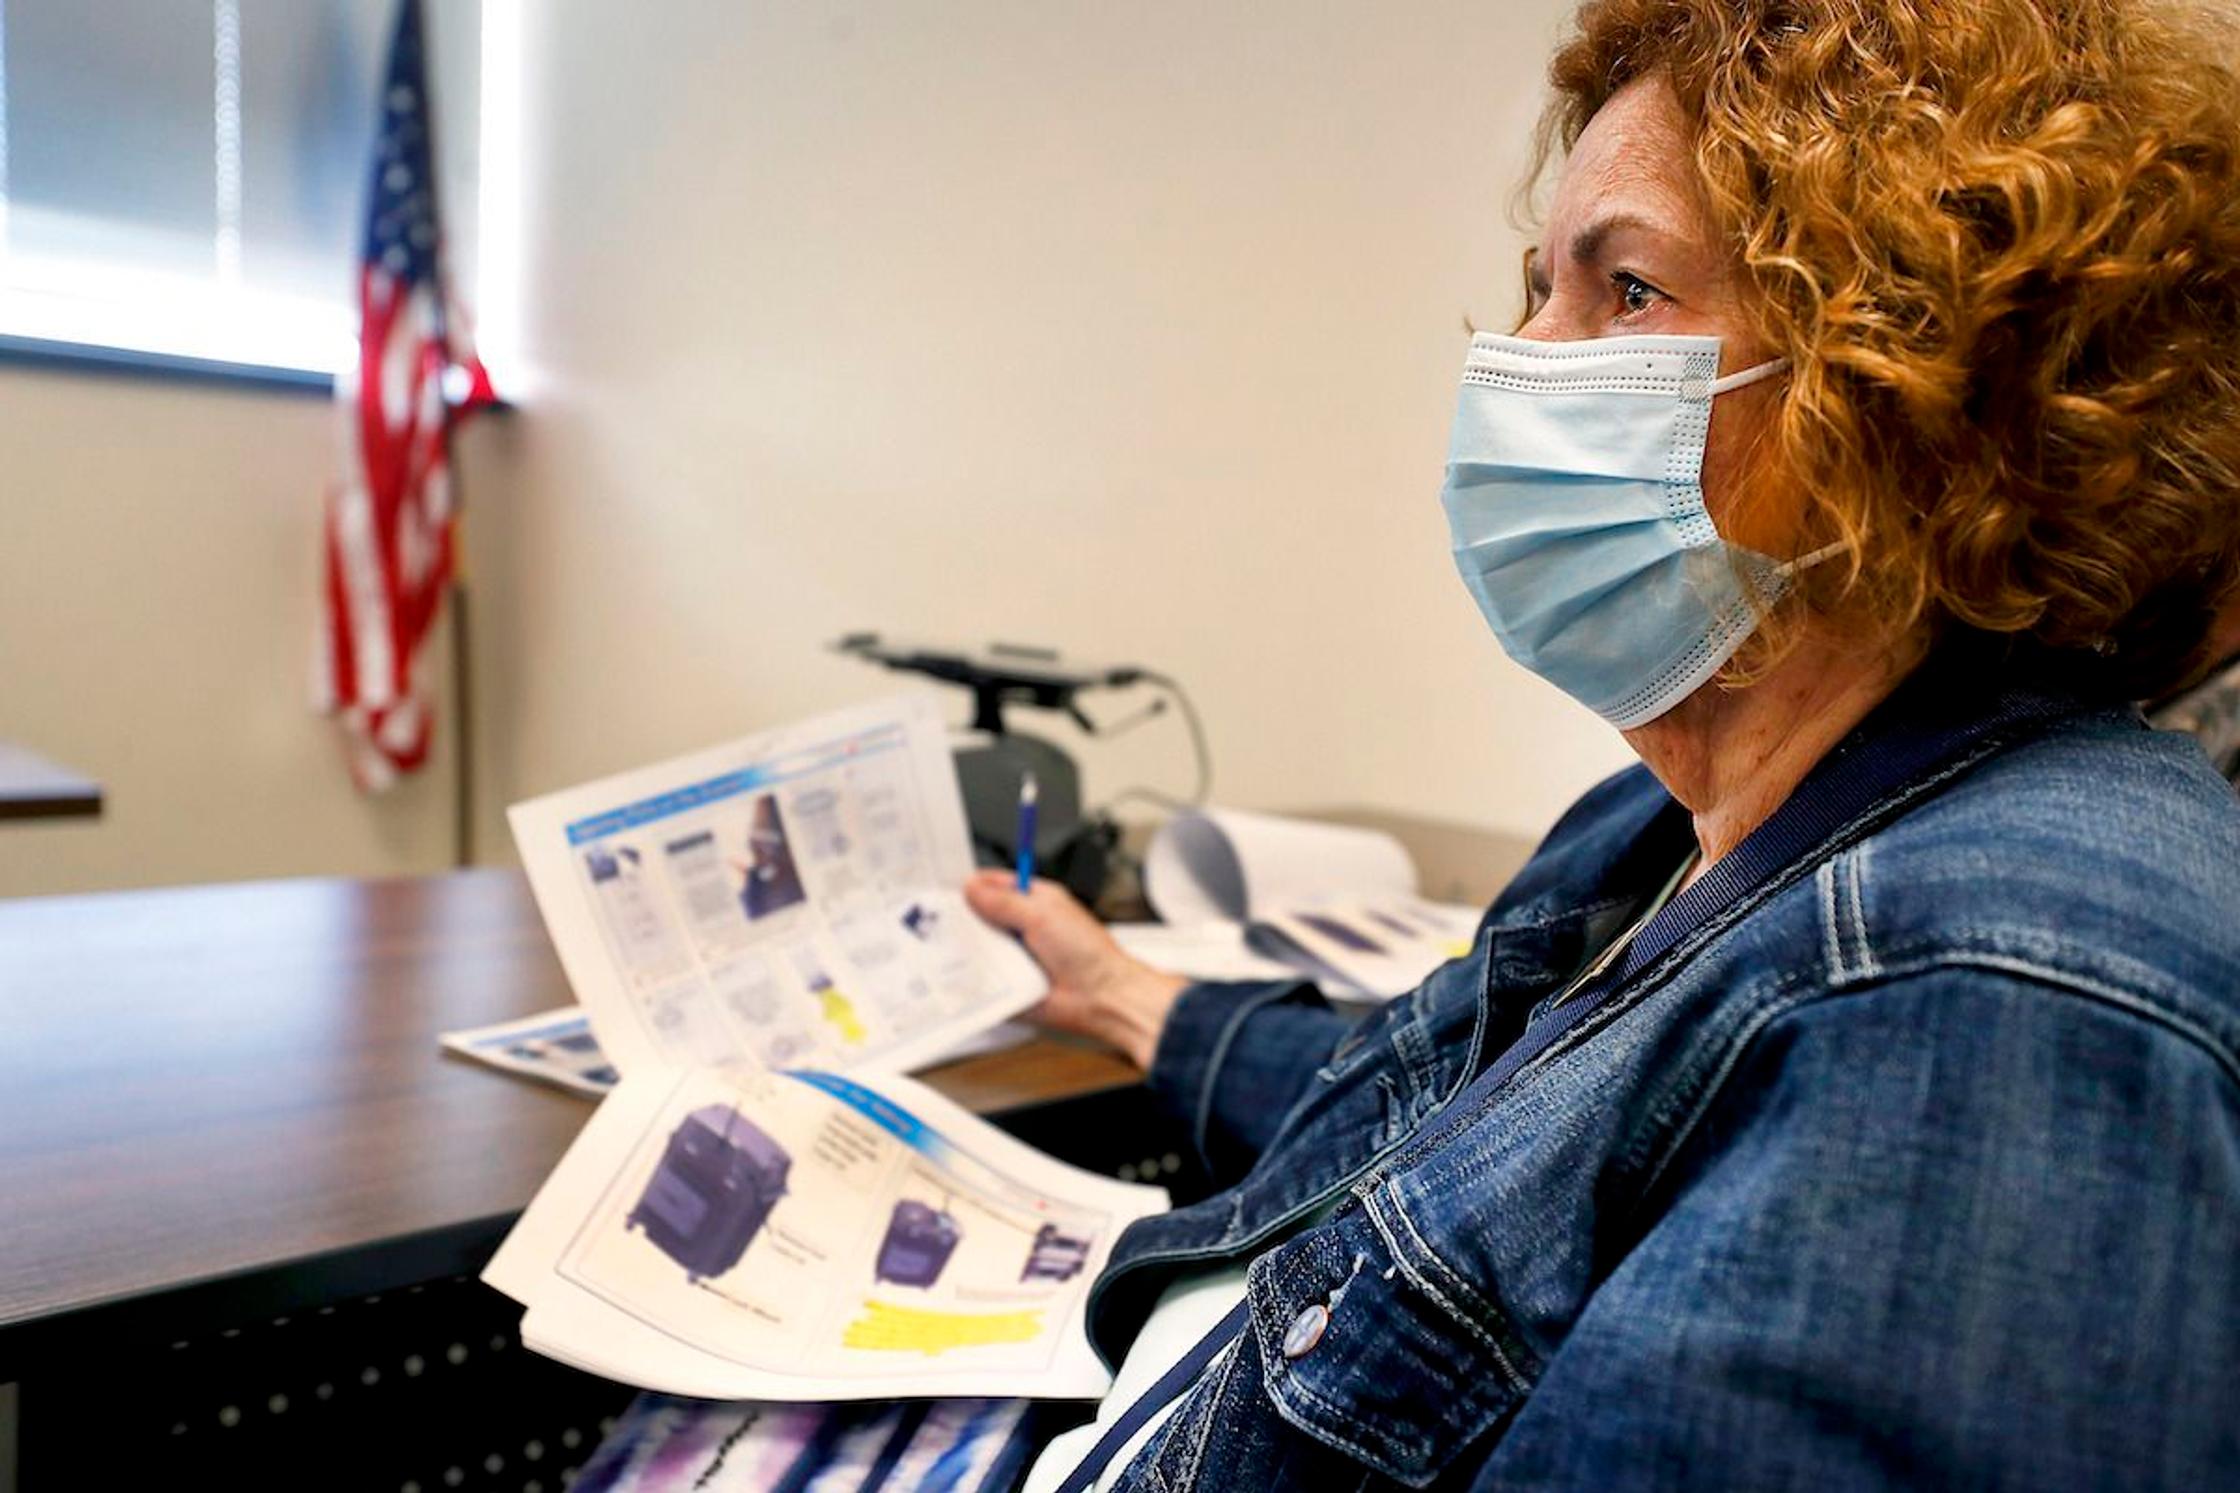 An election official sits with paperwork while wearing a face mask